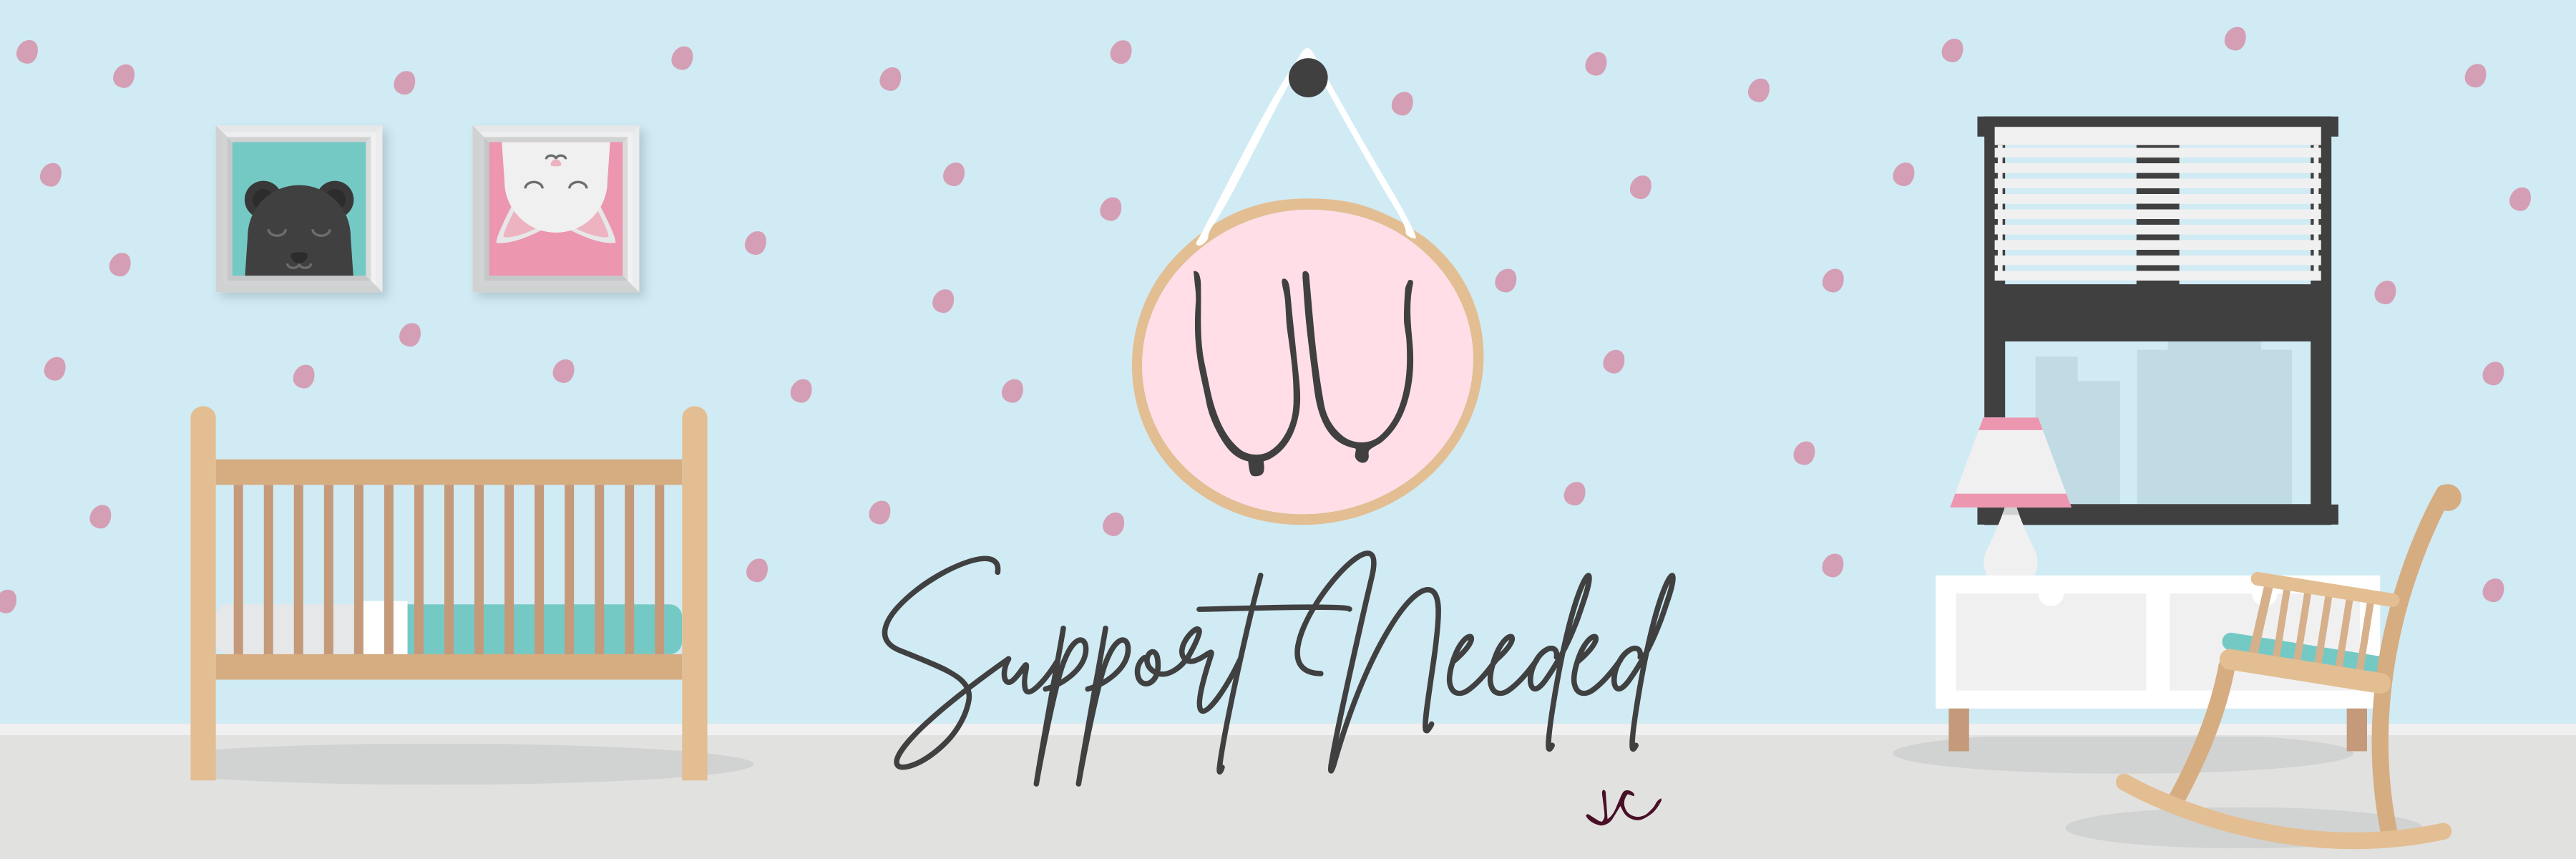 Essential Tips for How to Support a New Mom - support needed - titty city design - let's talk titties blog banner